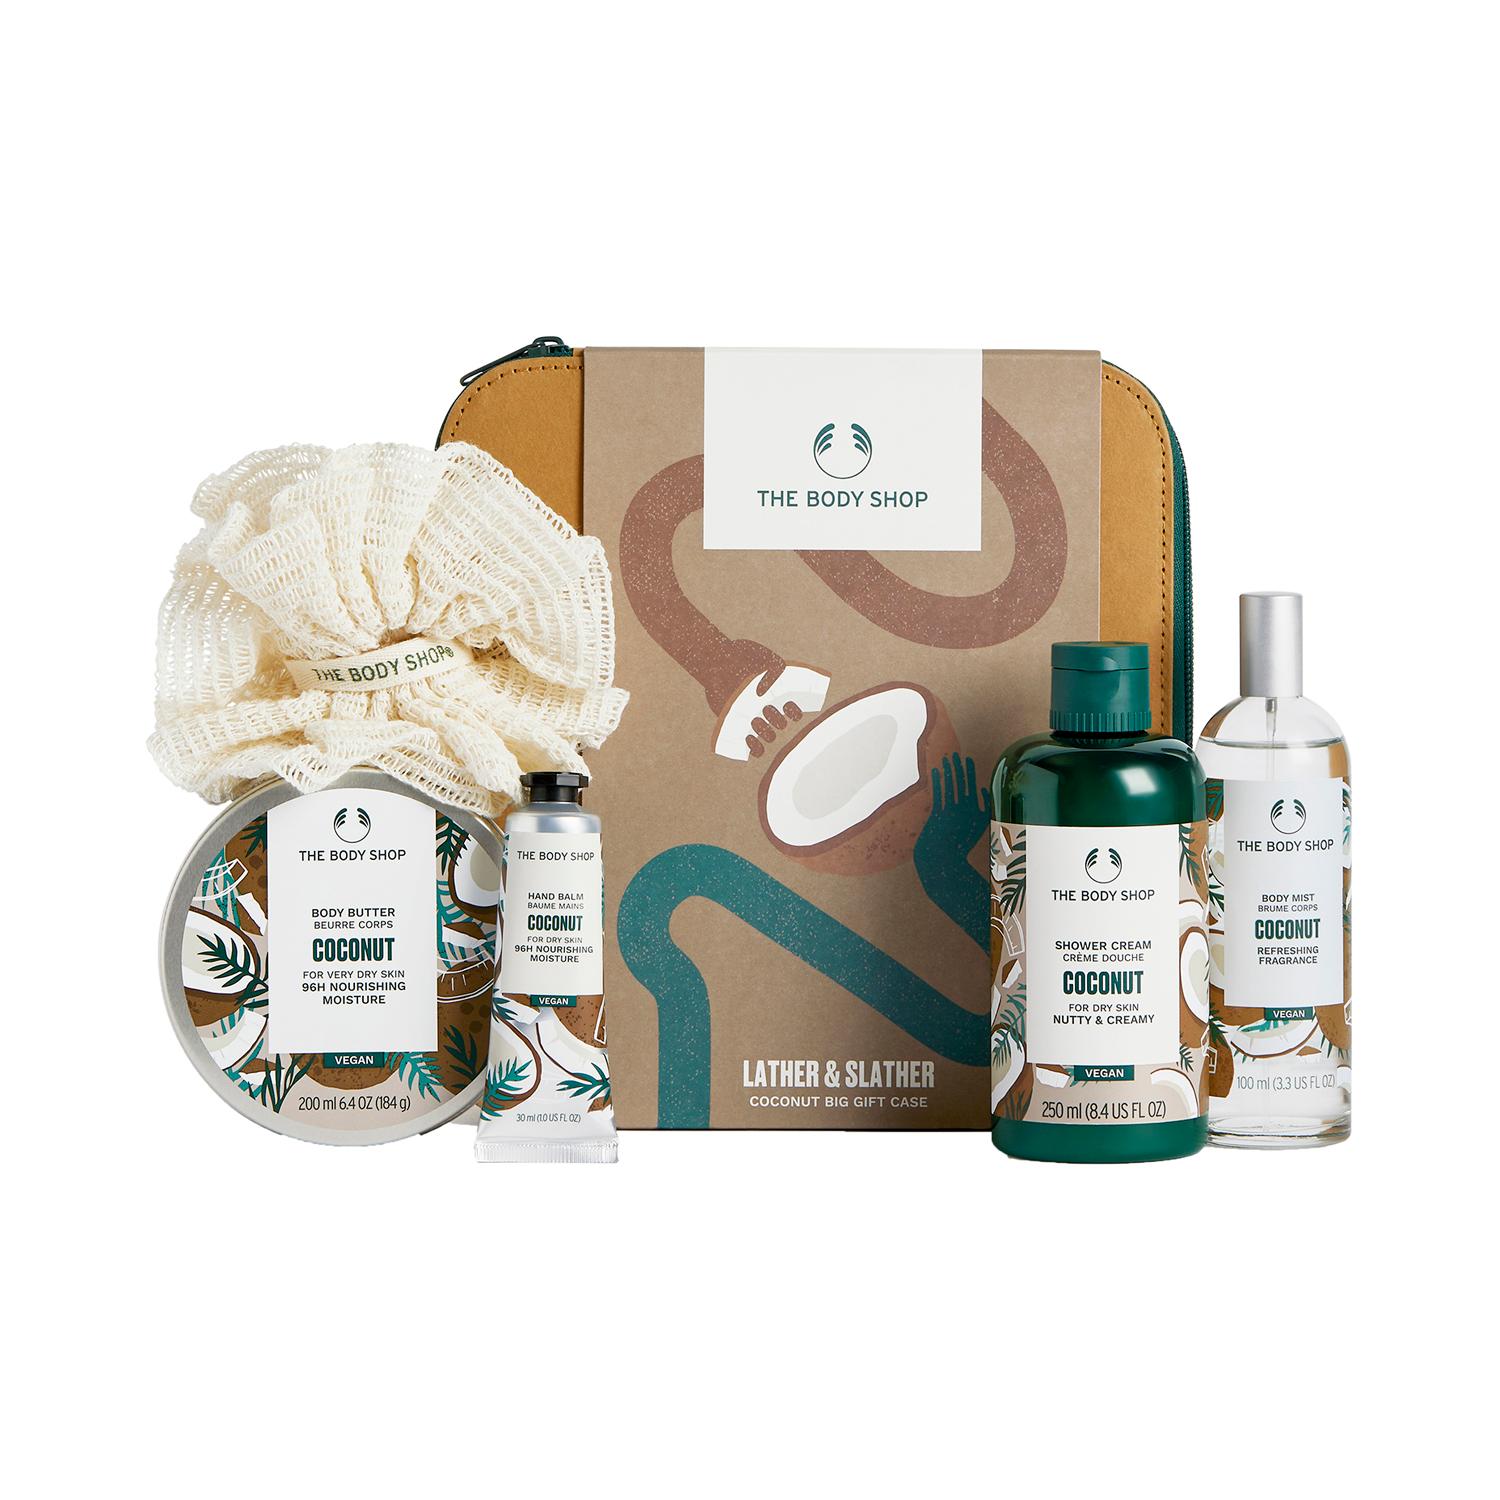 The Body Shop | The Body Shop Shower Cream Coconut, Body Butter, Body Mist, Hand Balm & Bath Lily Large Ramie Gift Set (6 pcs)